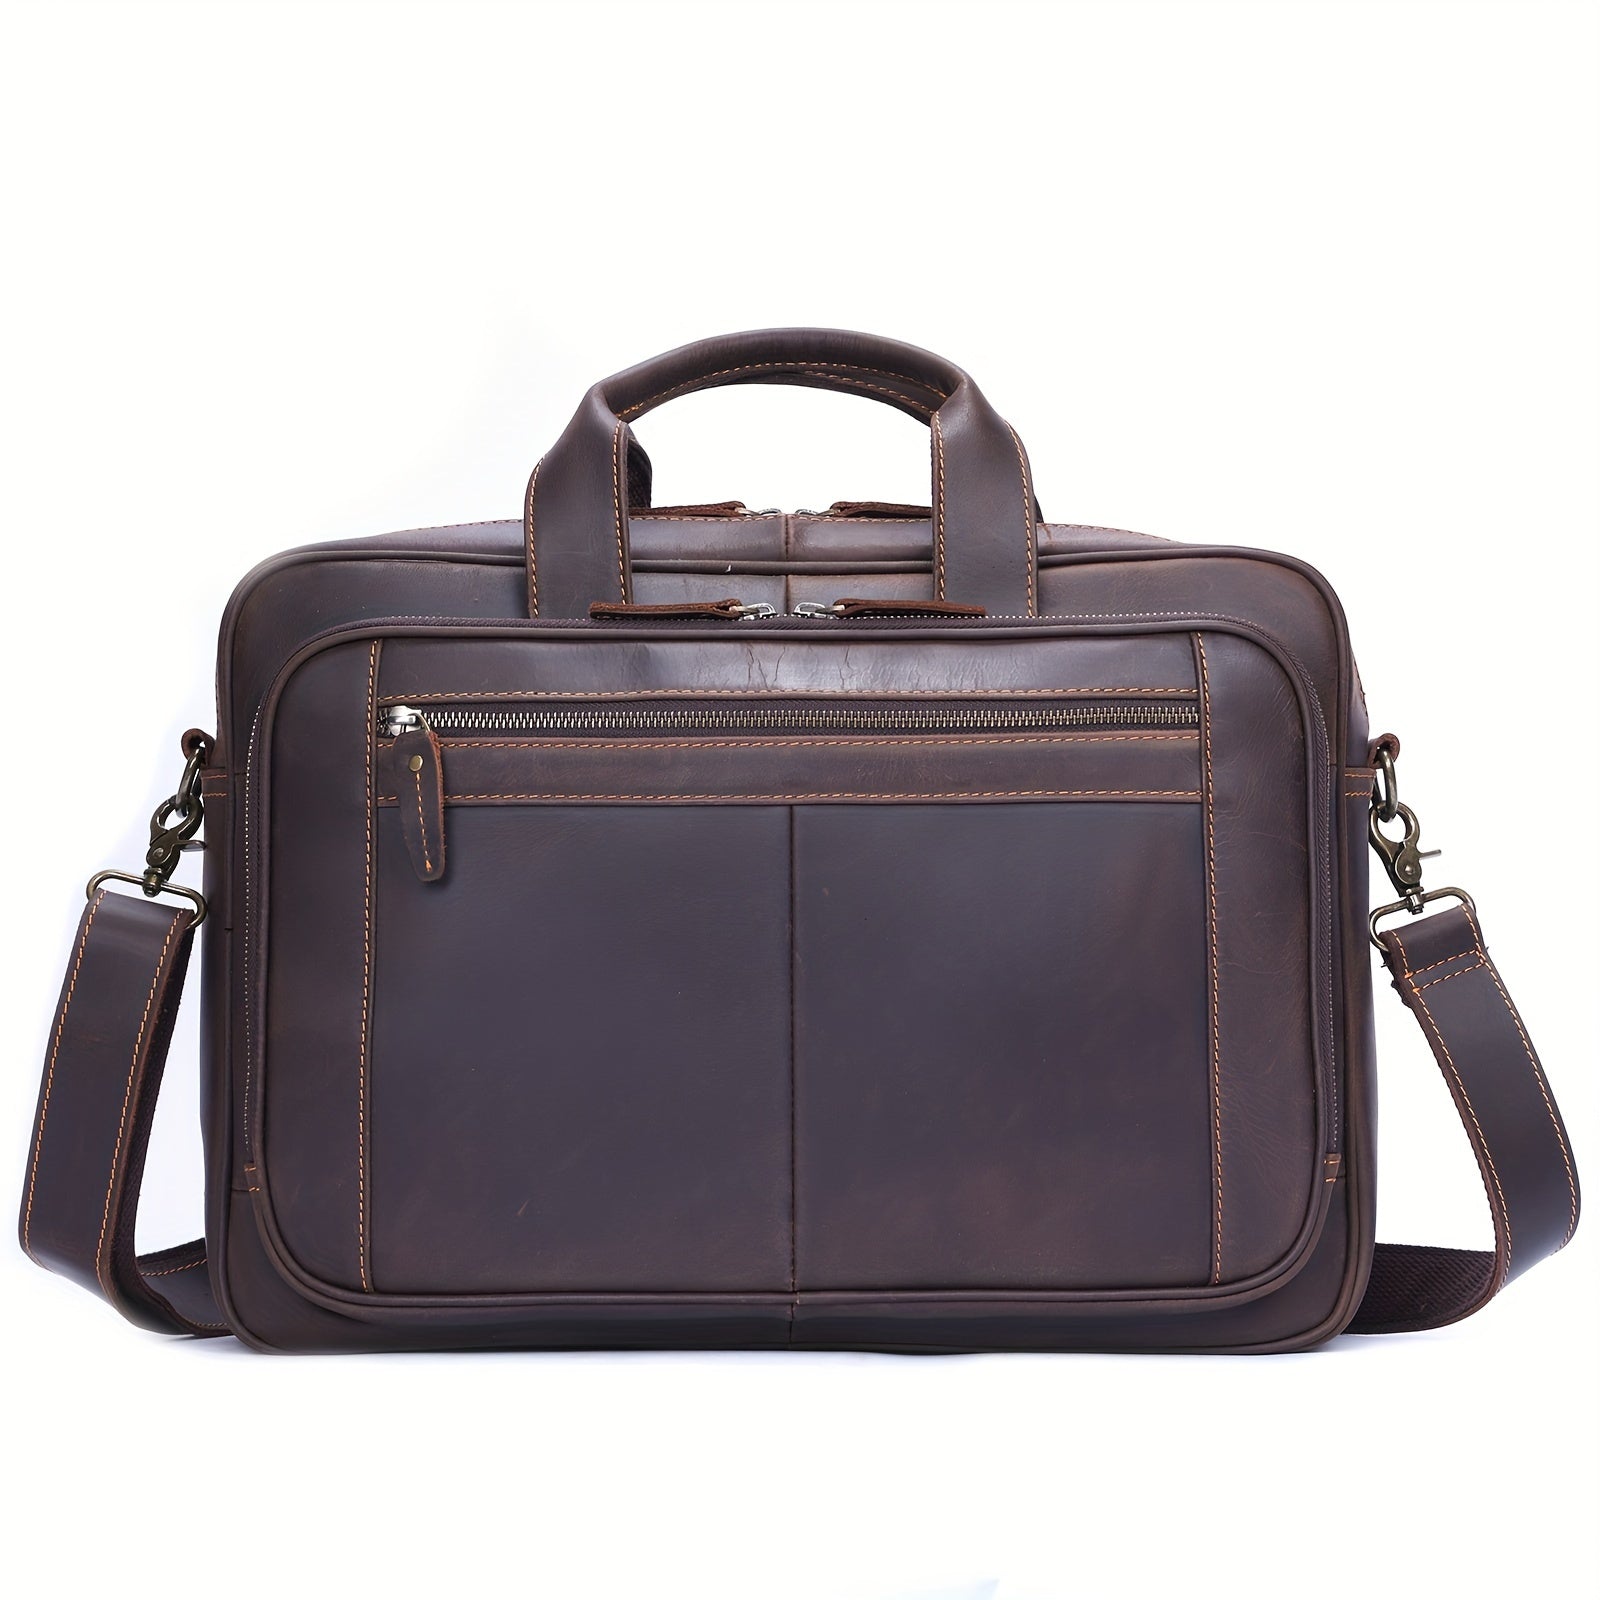 Vintage Men's Leather Business Travel Briefcase Fits 43.18 cm Laptop Messenger Bag Genuine Leather Briefcase Handbag Duffel Bags For Men, Ideal choice for Gifts , School bags, Valentines Gifts